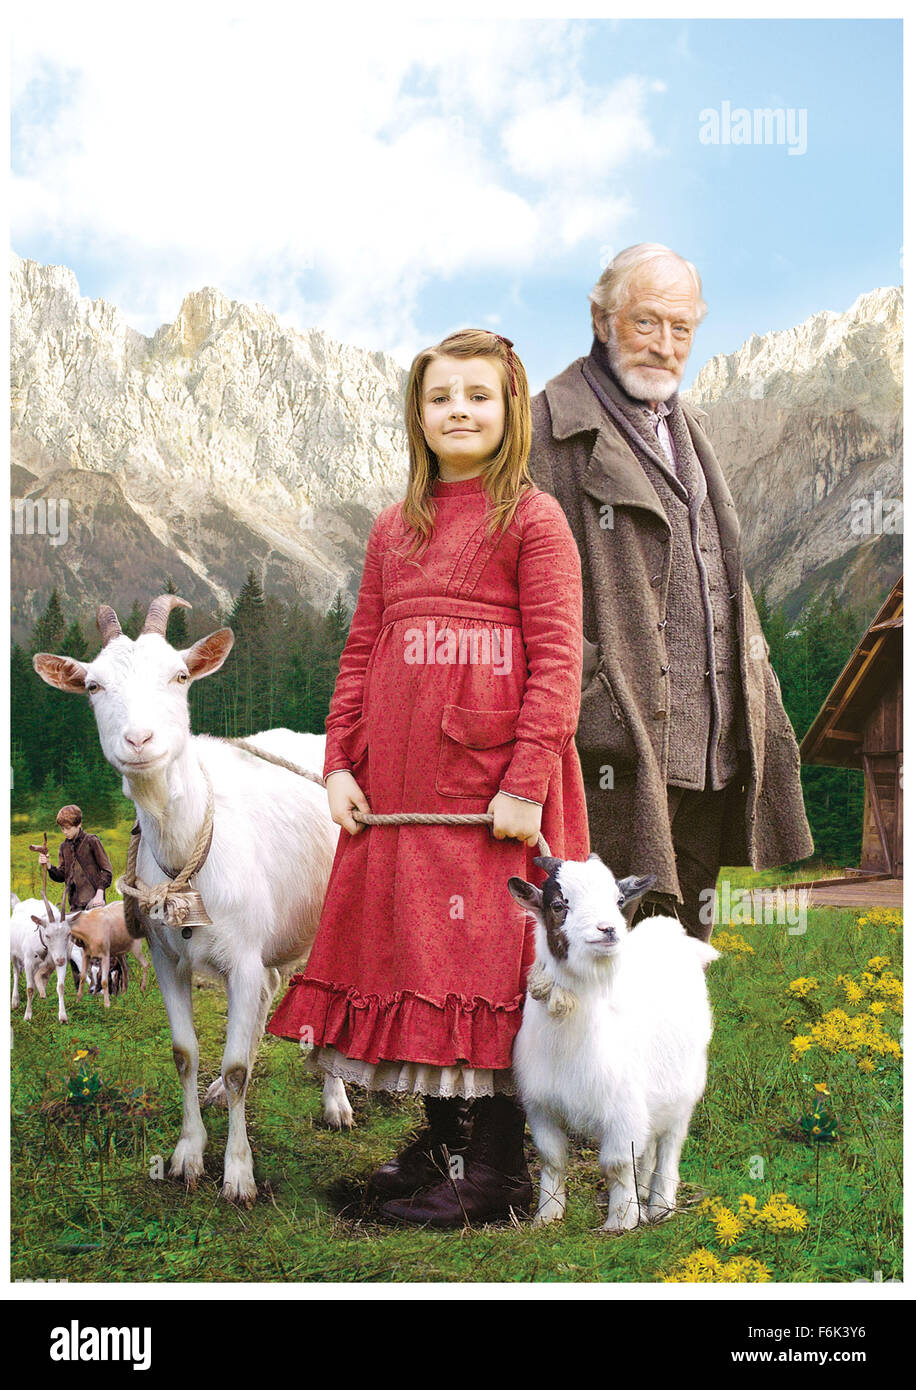 RELEASE DATE: August 19 2005. MOVIE TITLE: Heidi. STUDIO: Suitable Viewing. PLOT: Swiss girl Adelheid 'Heidi' is orphaned young. Aunt Detie brings her to grandpa Alp and his wife, who live isolated in the Alps since his murder charge. Heidi soon takes to the wild country, especially accompanying young goatherd Peter. Grandpa refuses to send her to school in the city, but aunt Detie returns and forces him to give in. She's sent to a posh lady in Frankfurt, where she'll be a companion for crippled daughter Clara after school hours. PICTURED: EMMA BOLGER as Heidi and MAX VON SYDOW as Uncle Alp. Stock Photo